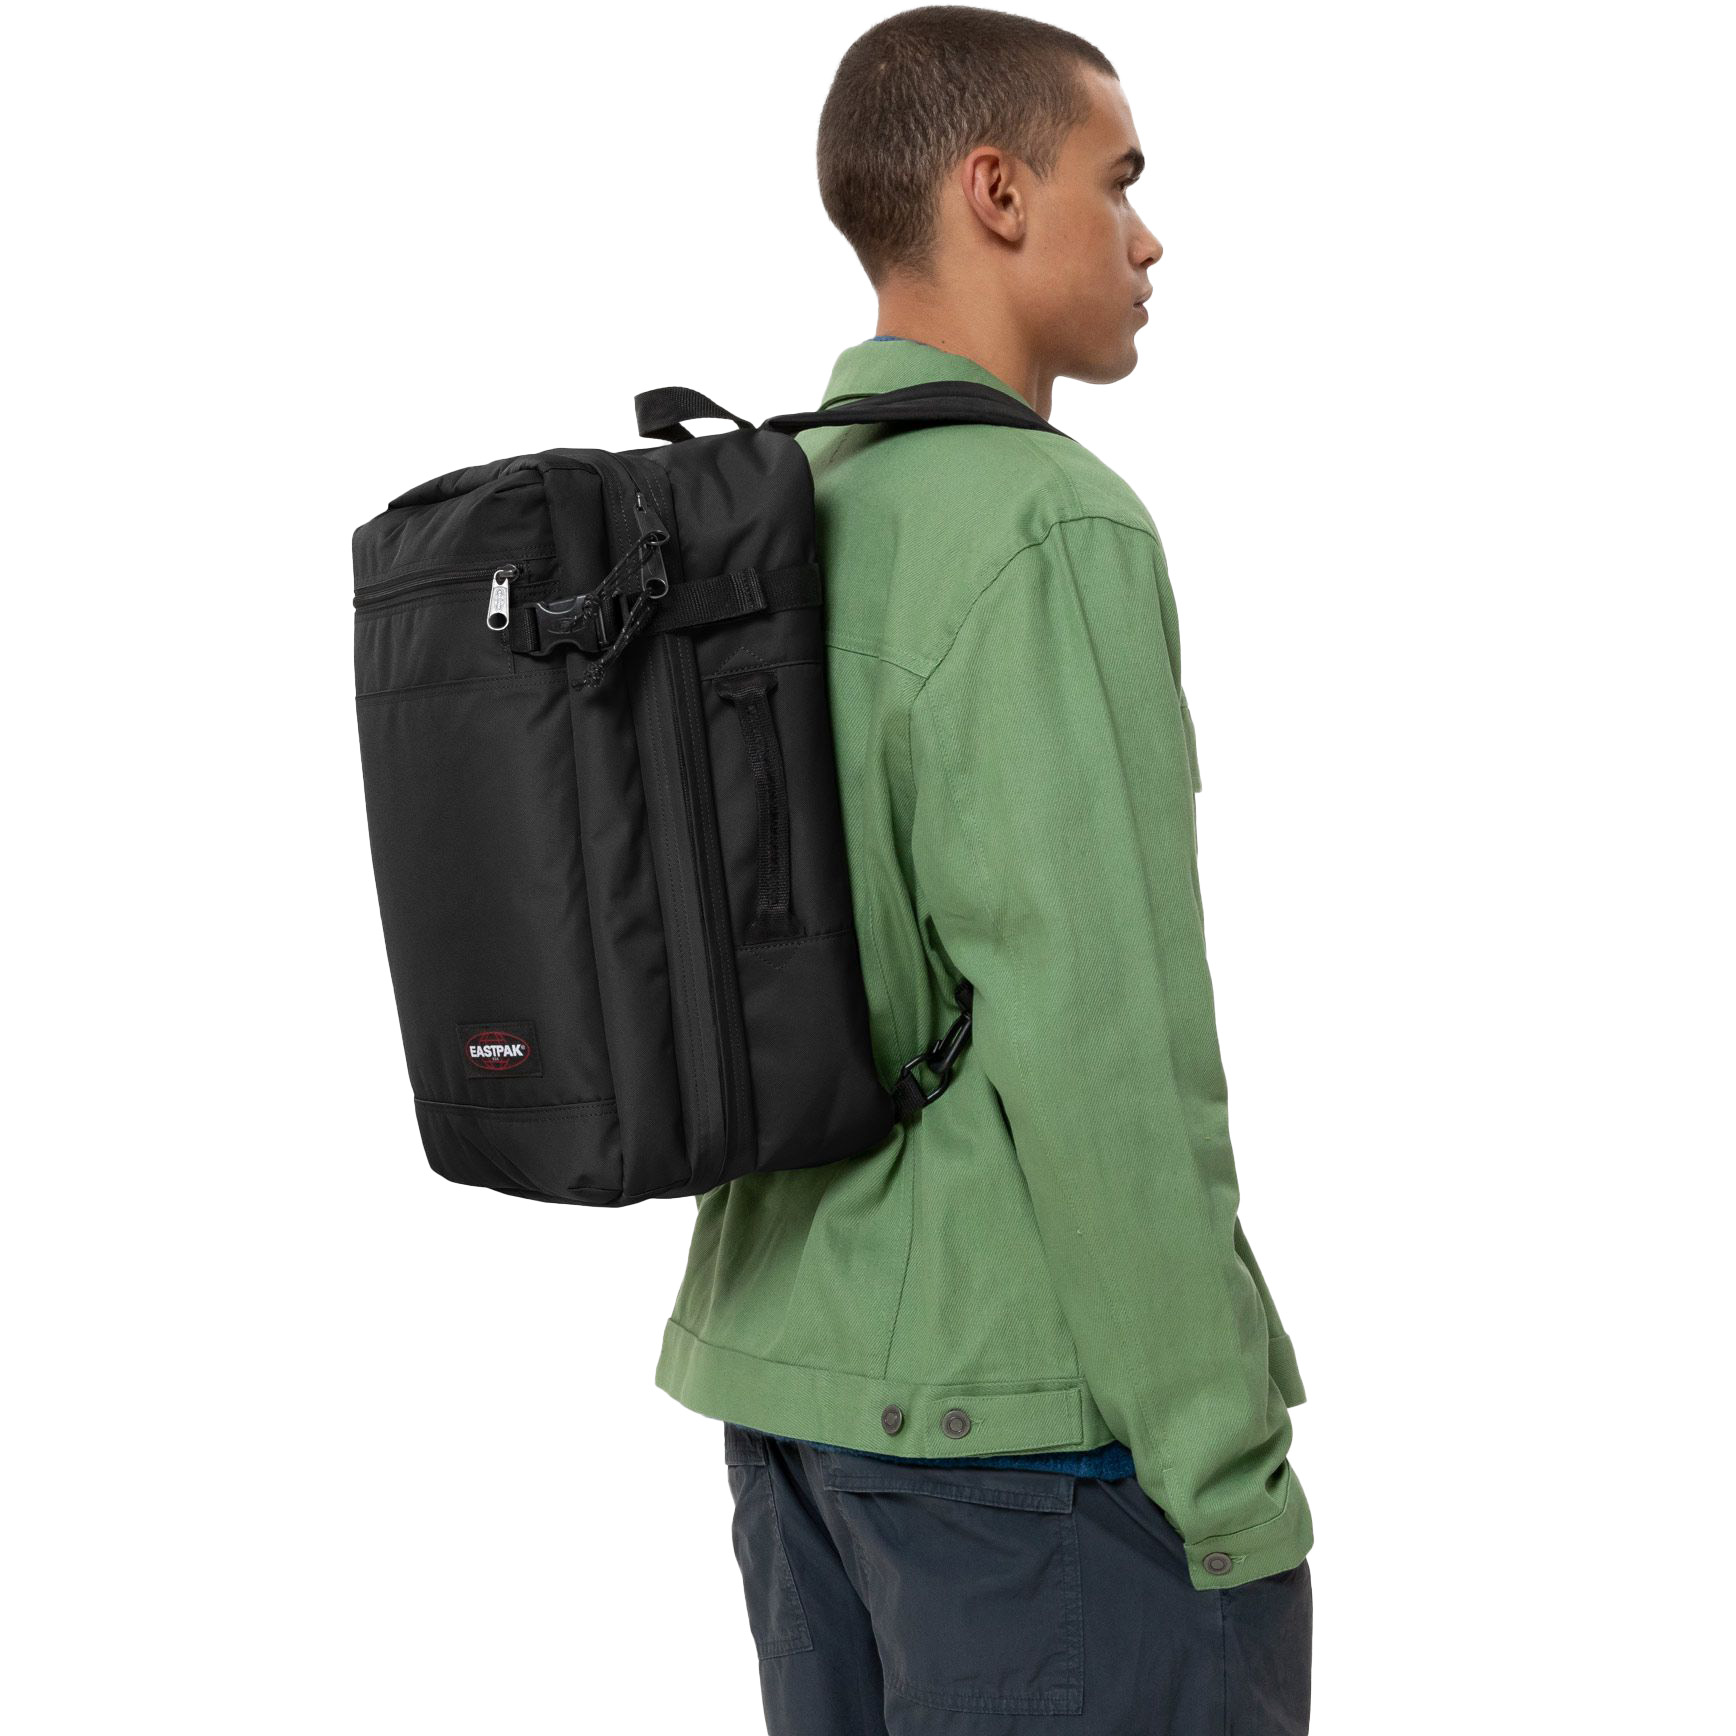 Eastpak Transit'r Compact Day Backpack